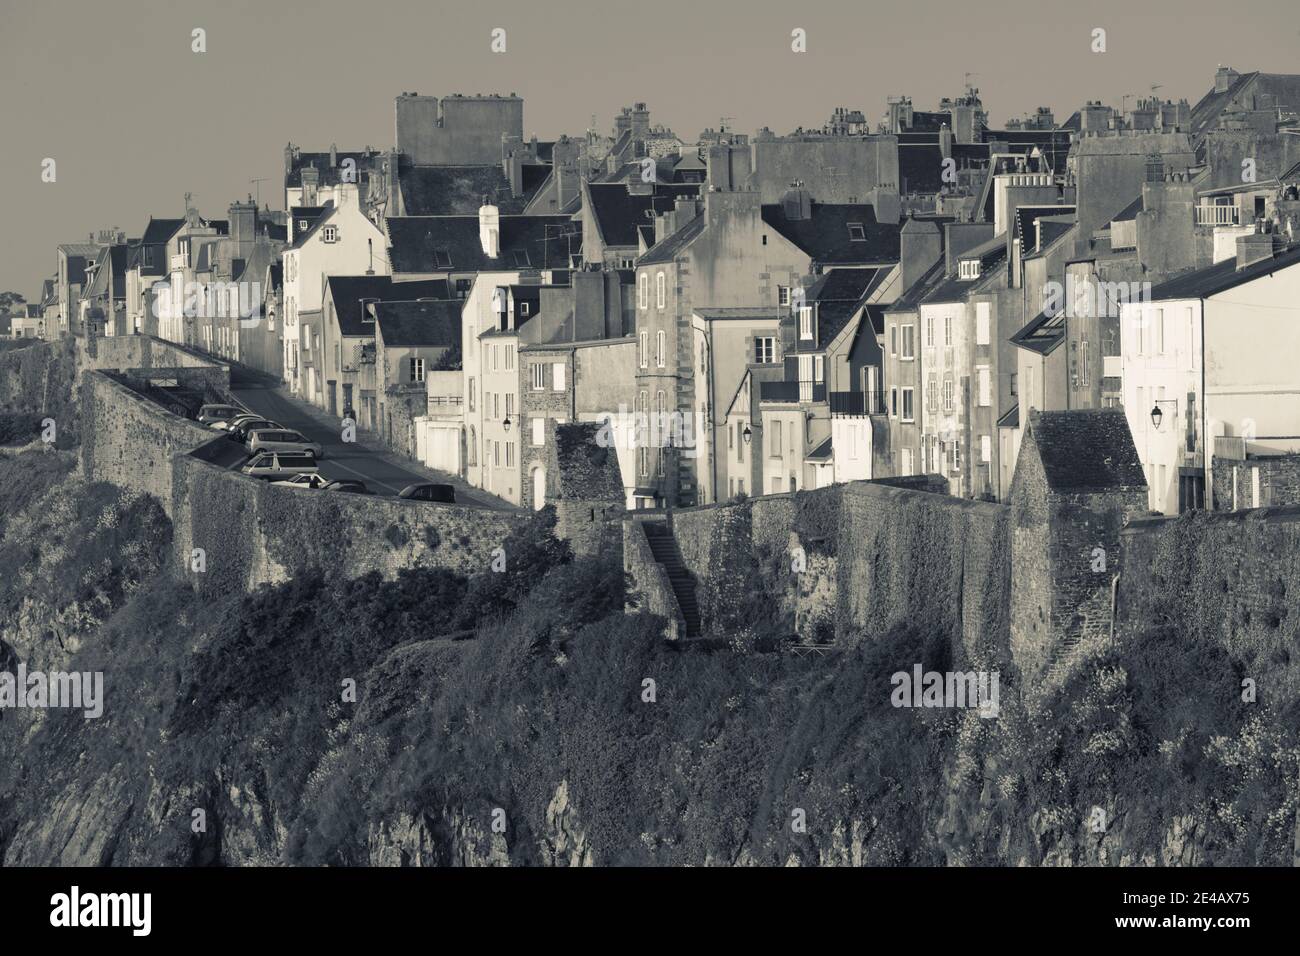 Houses in a town on a hill, Hauteville-sur-Mer, Granville, Manche, Normandy, France Stock Photo